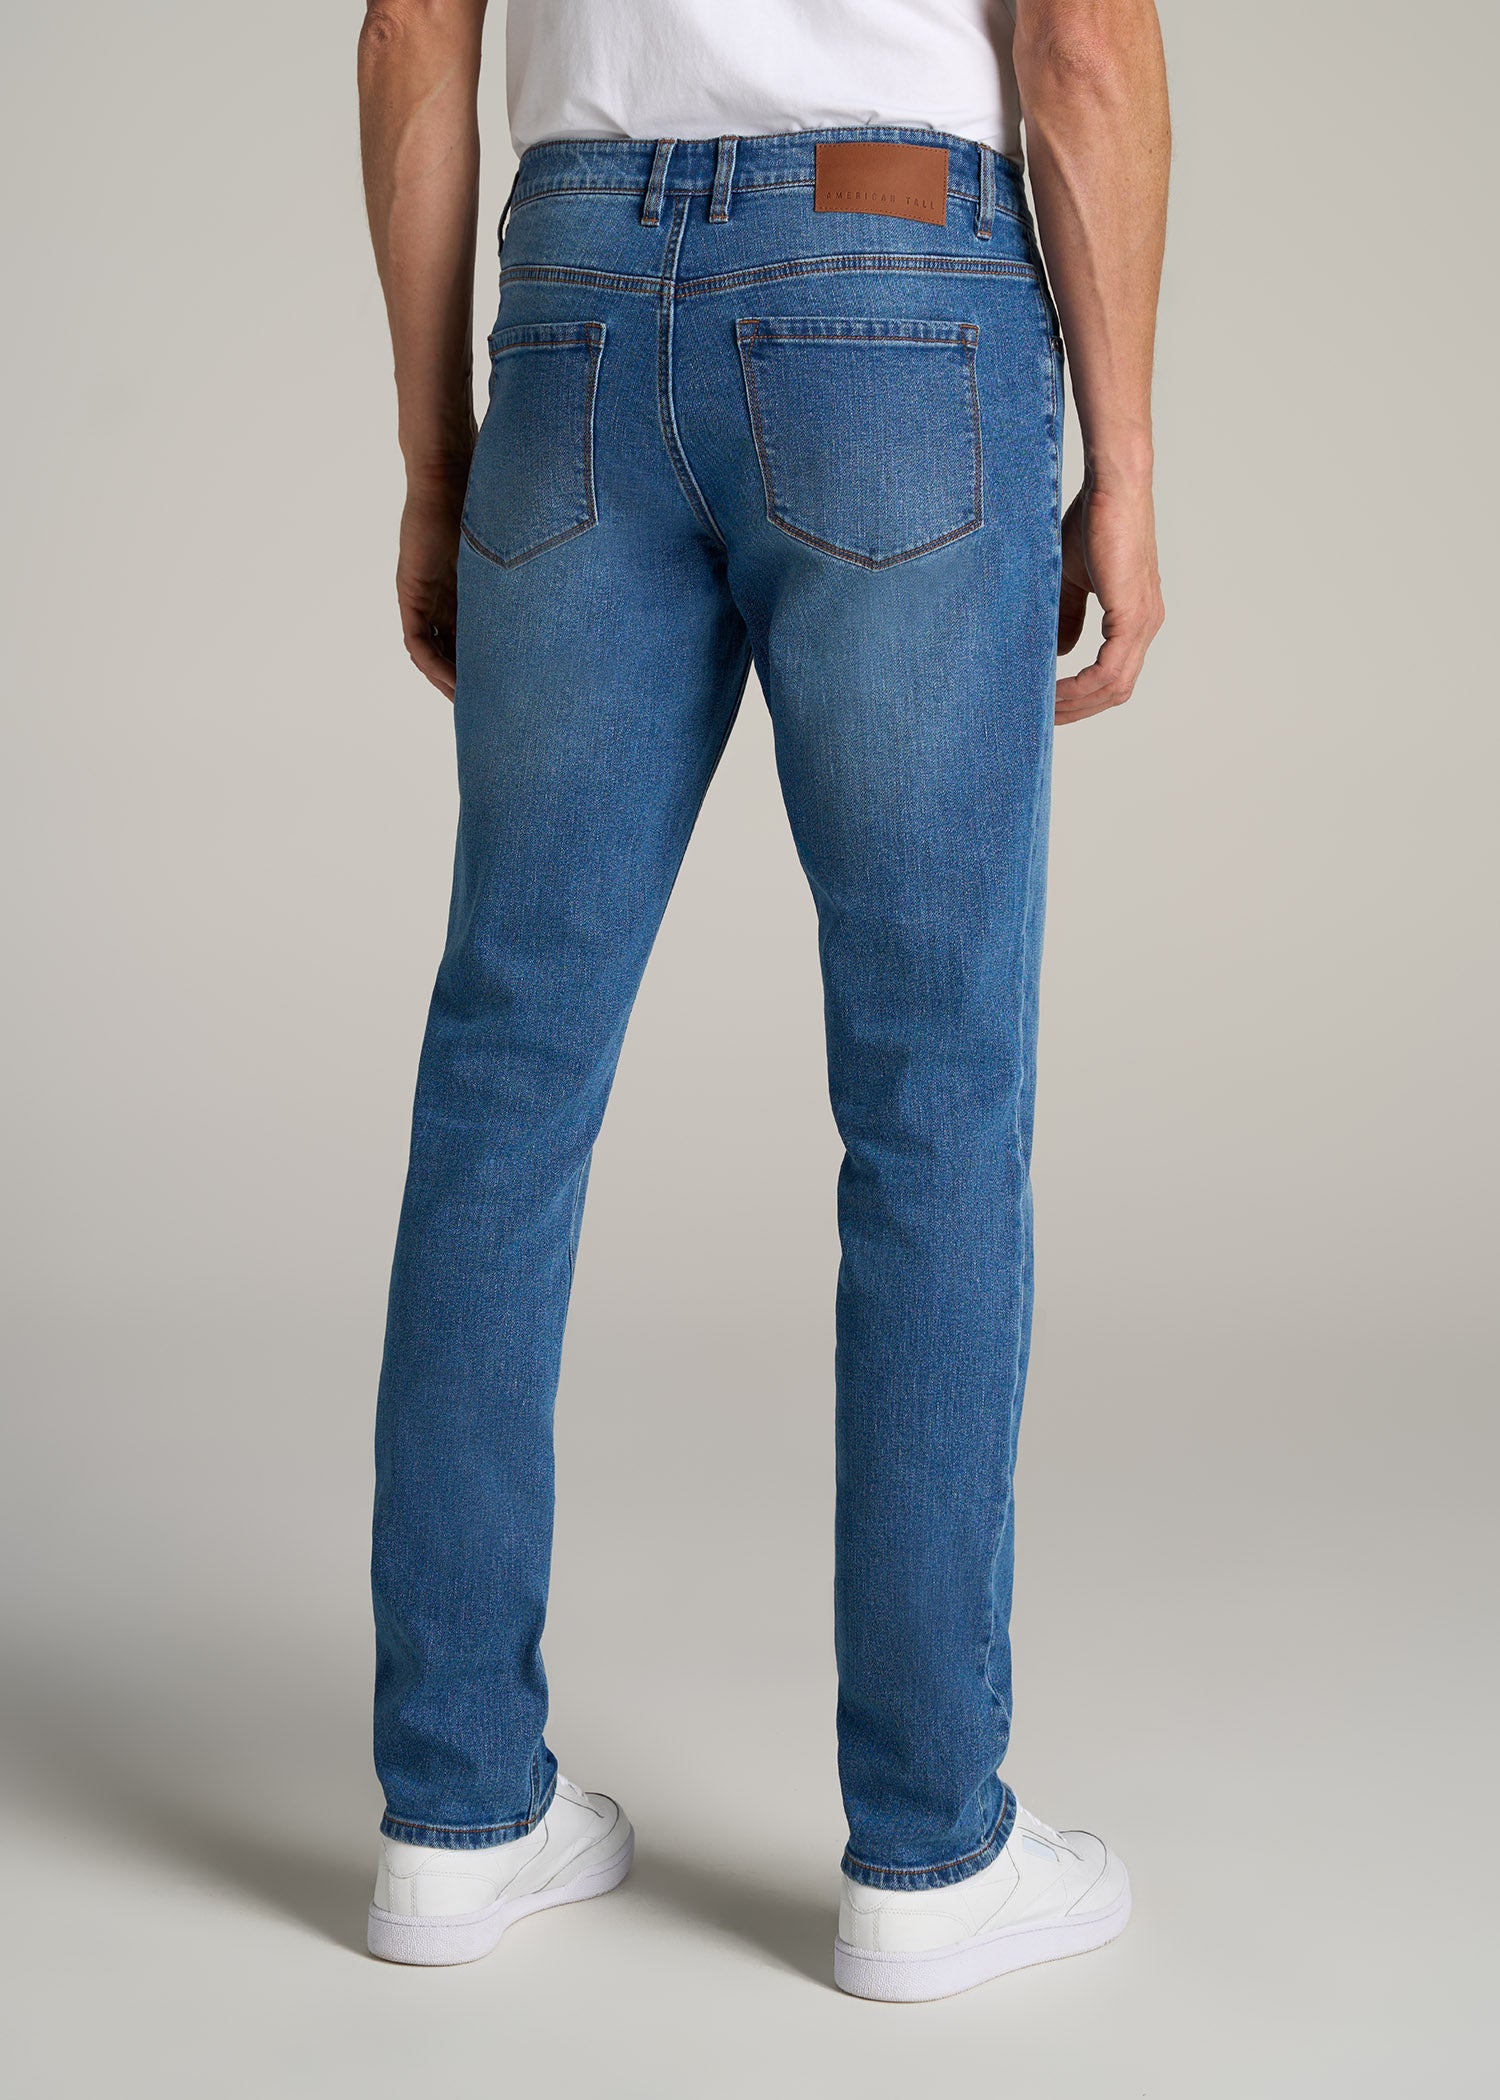 Nuon Blue Whiskering Rodeo Carrot Fit Jeans – Westside